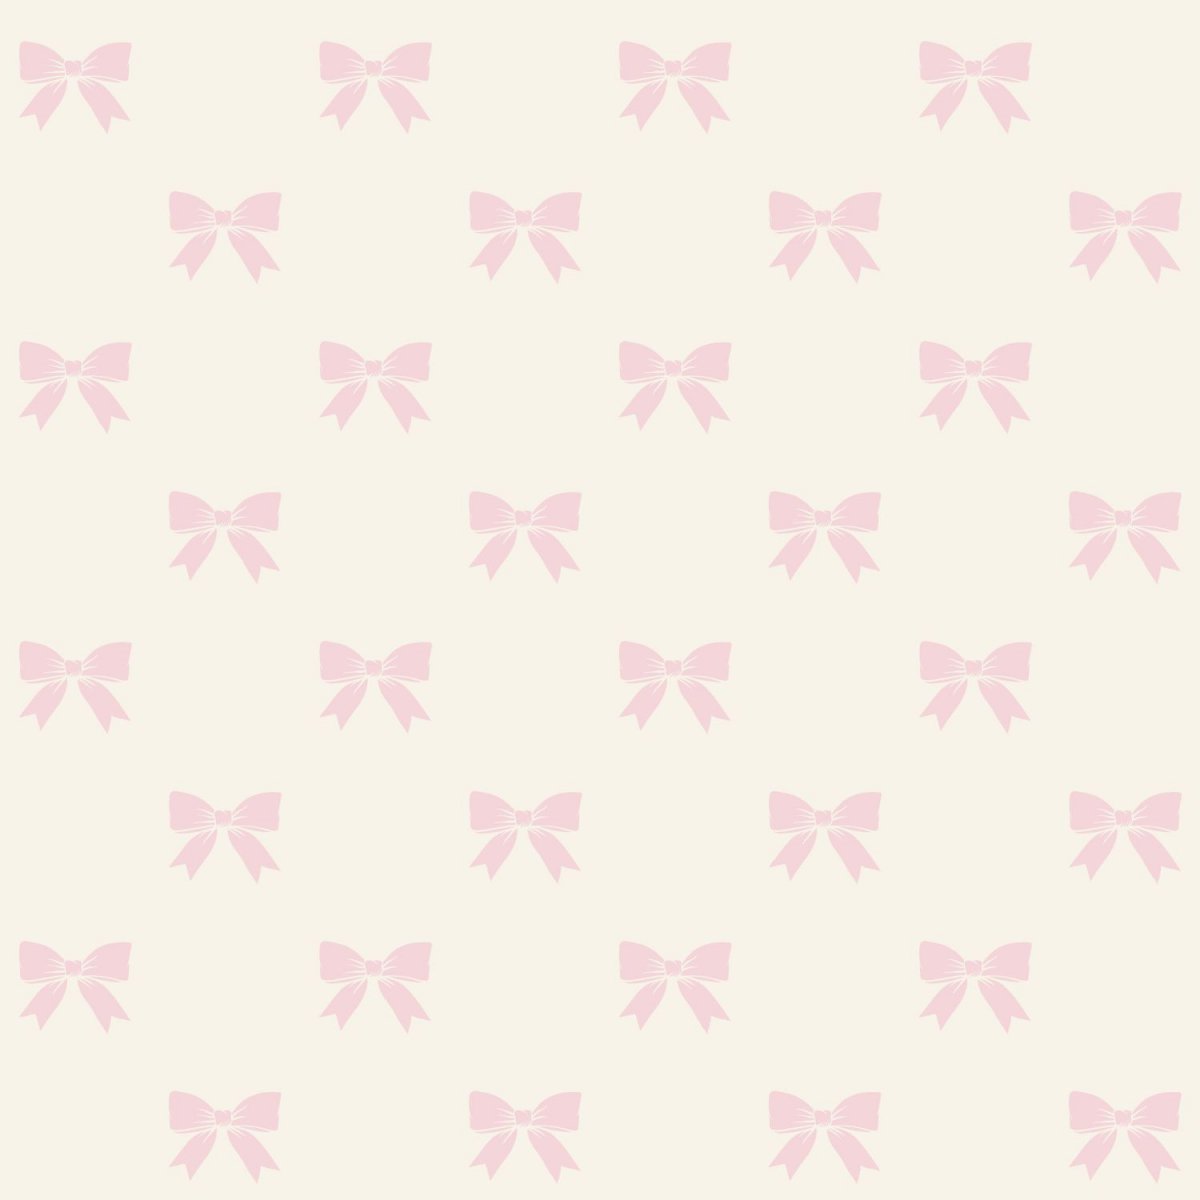 Pearl wallpaper with pink bows - All wallpapers - Walls - Shop on-line ...